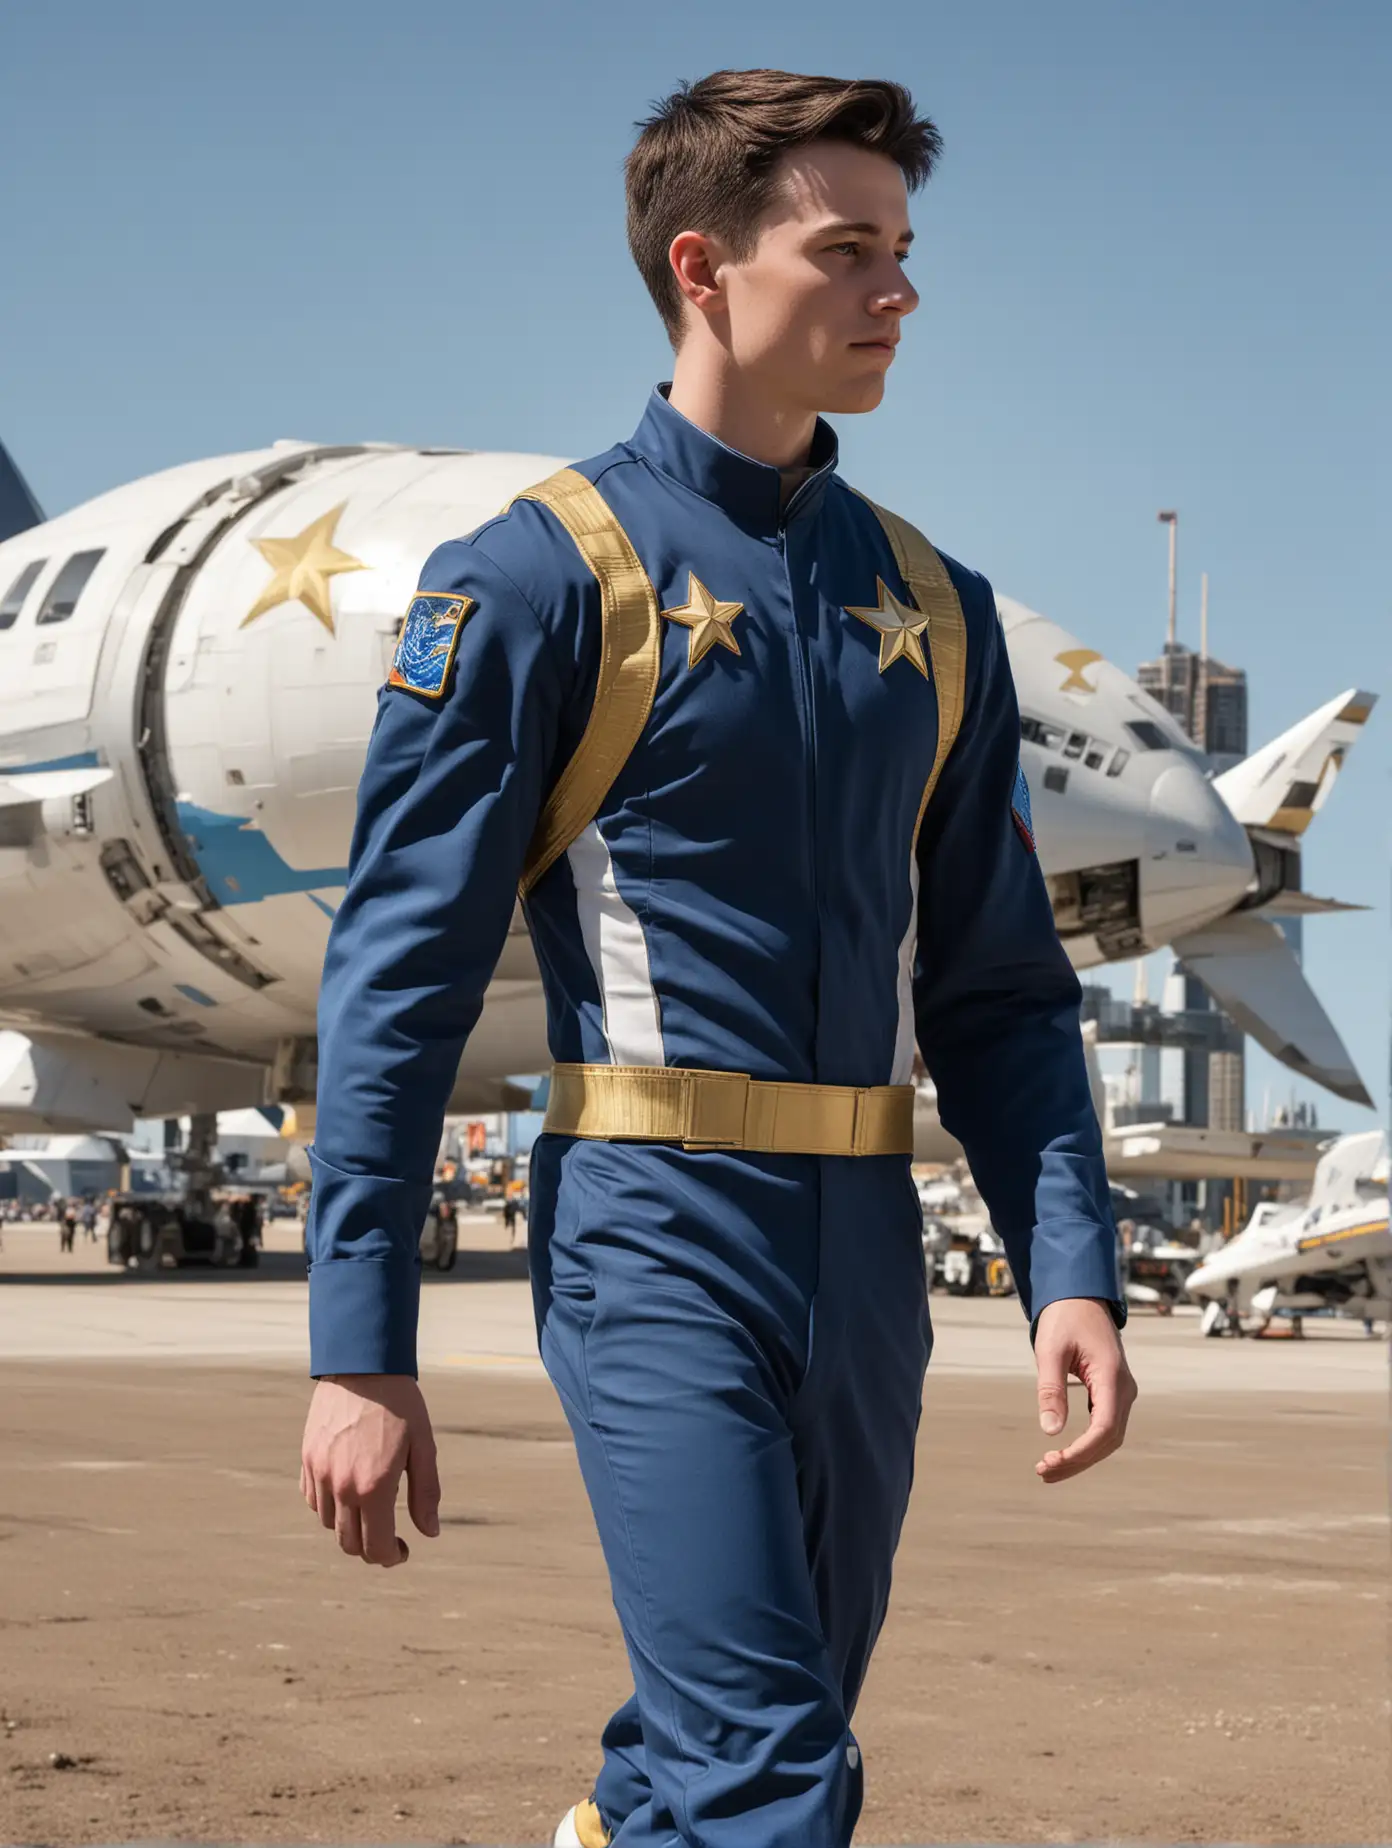 Muscular young white man, broad shoulders, narrow waist, dark hair, tight fitting blue space cadet uniform, with white stripes and gold star logo on chest, large groin bulge, tight straps around legs, walks across the spaceport , outdoors towards futuristic space craft, with the towers of the city in the background, bright sun and blue sky